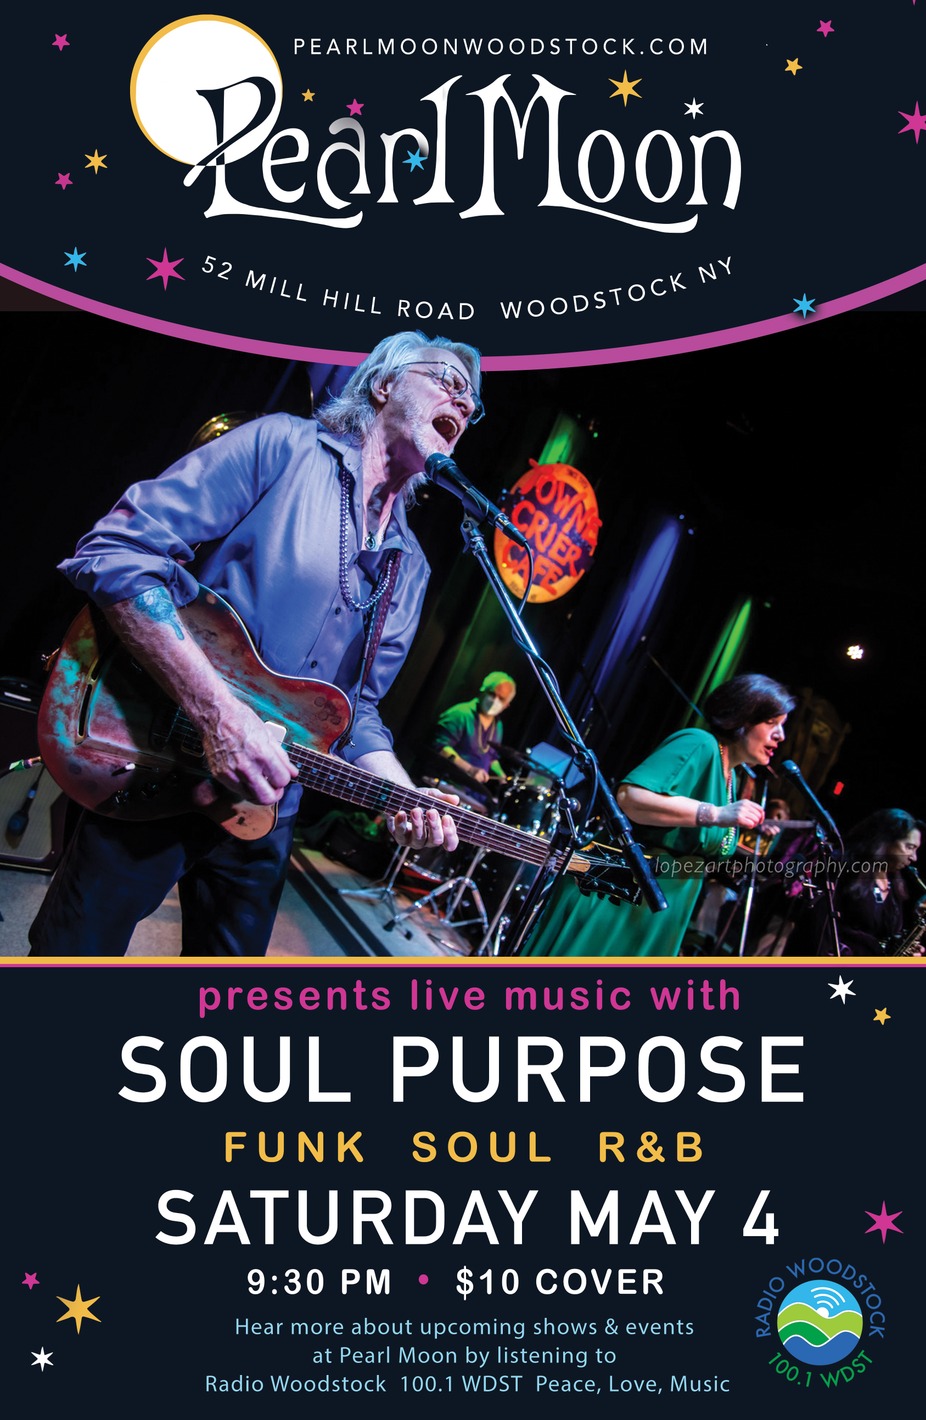 SOUL PURPOSE at PEARL MOON WOODSTOCK event photo